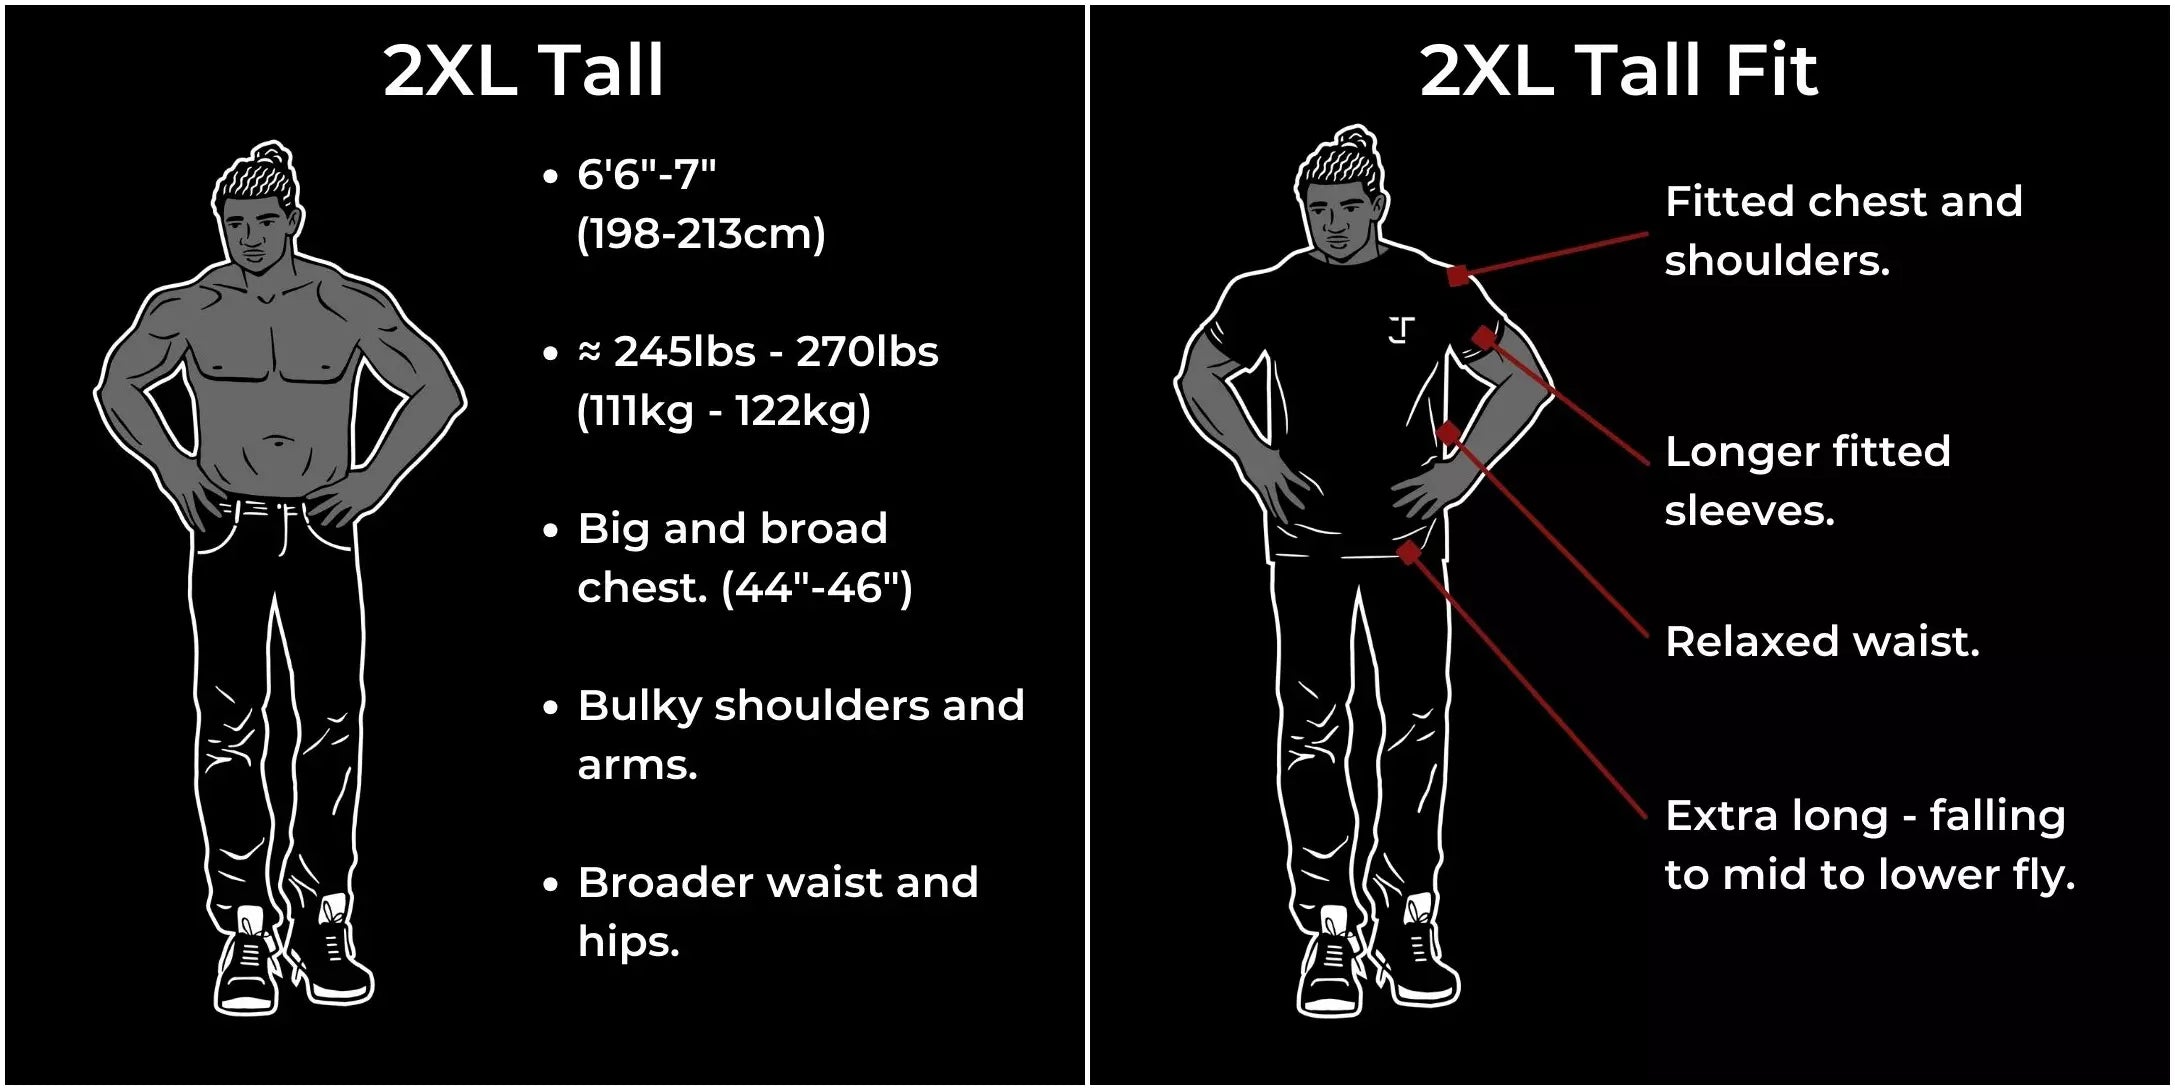 2XL tall for tall and broad guys 245-270lbs and 6'6"-7".